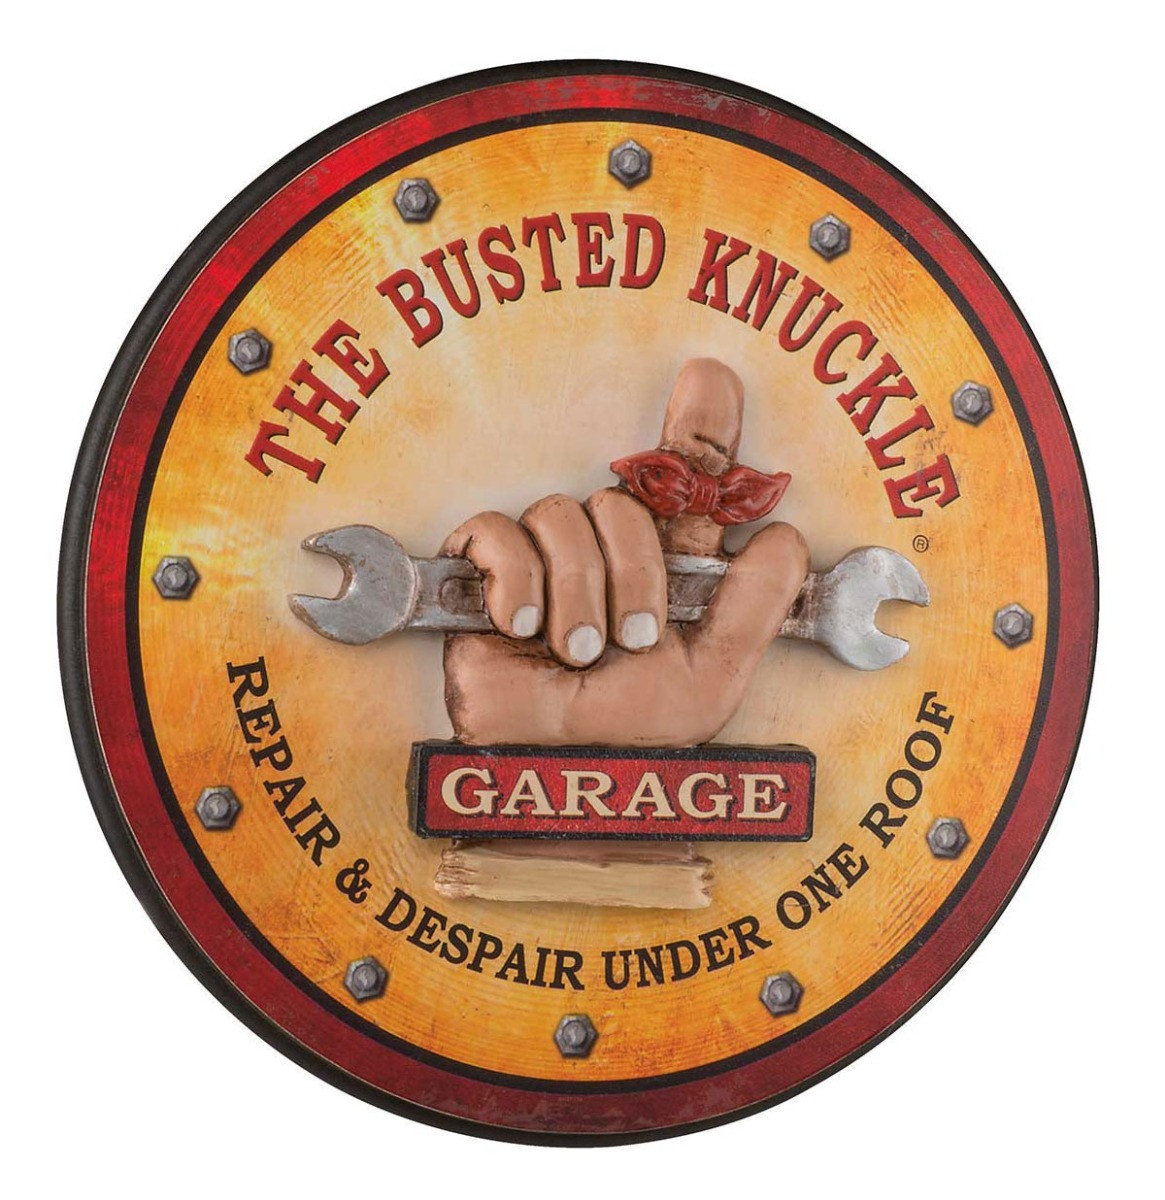 Busted Knuckle Garage Round Pub Sign